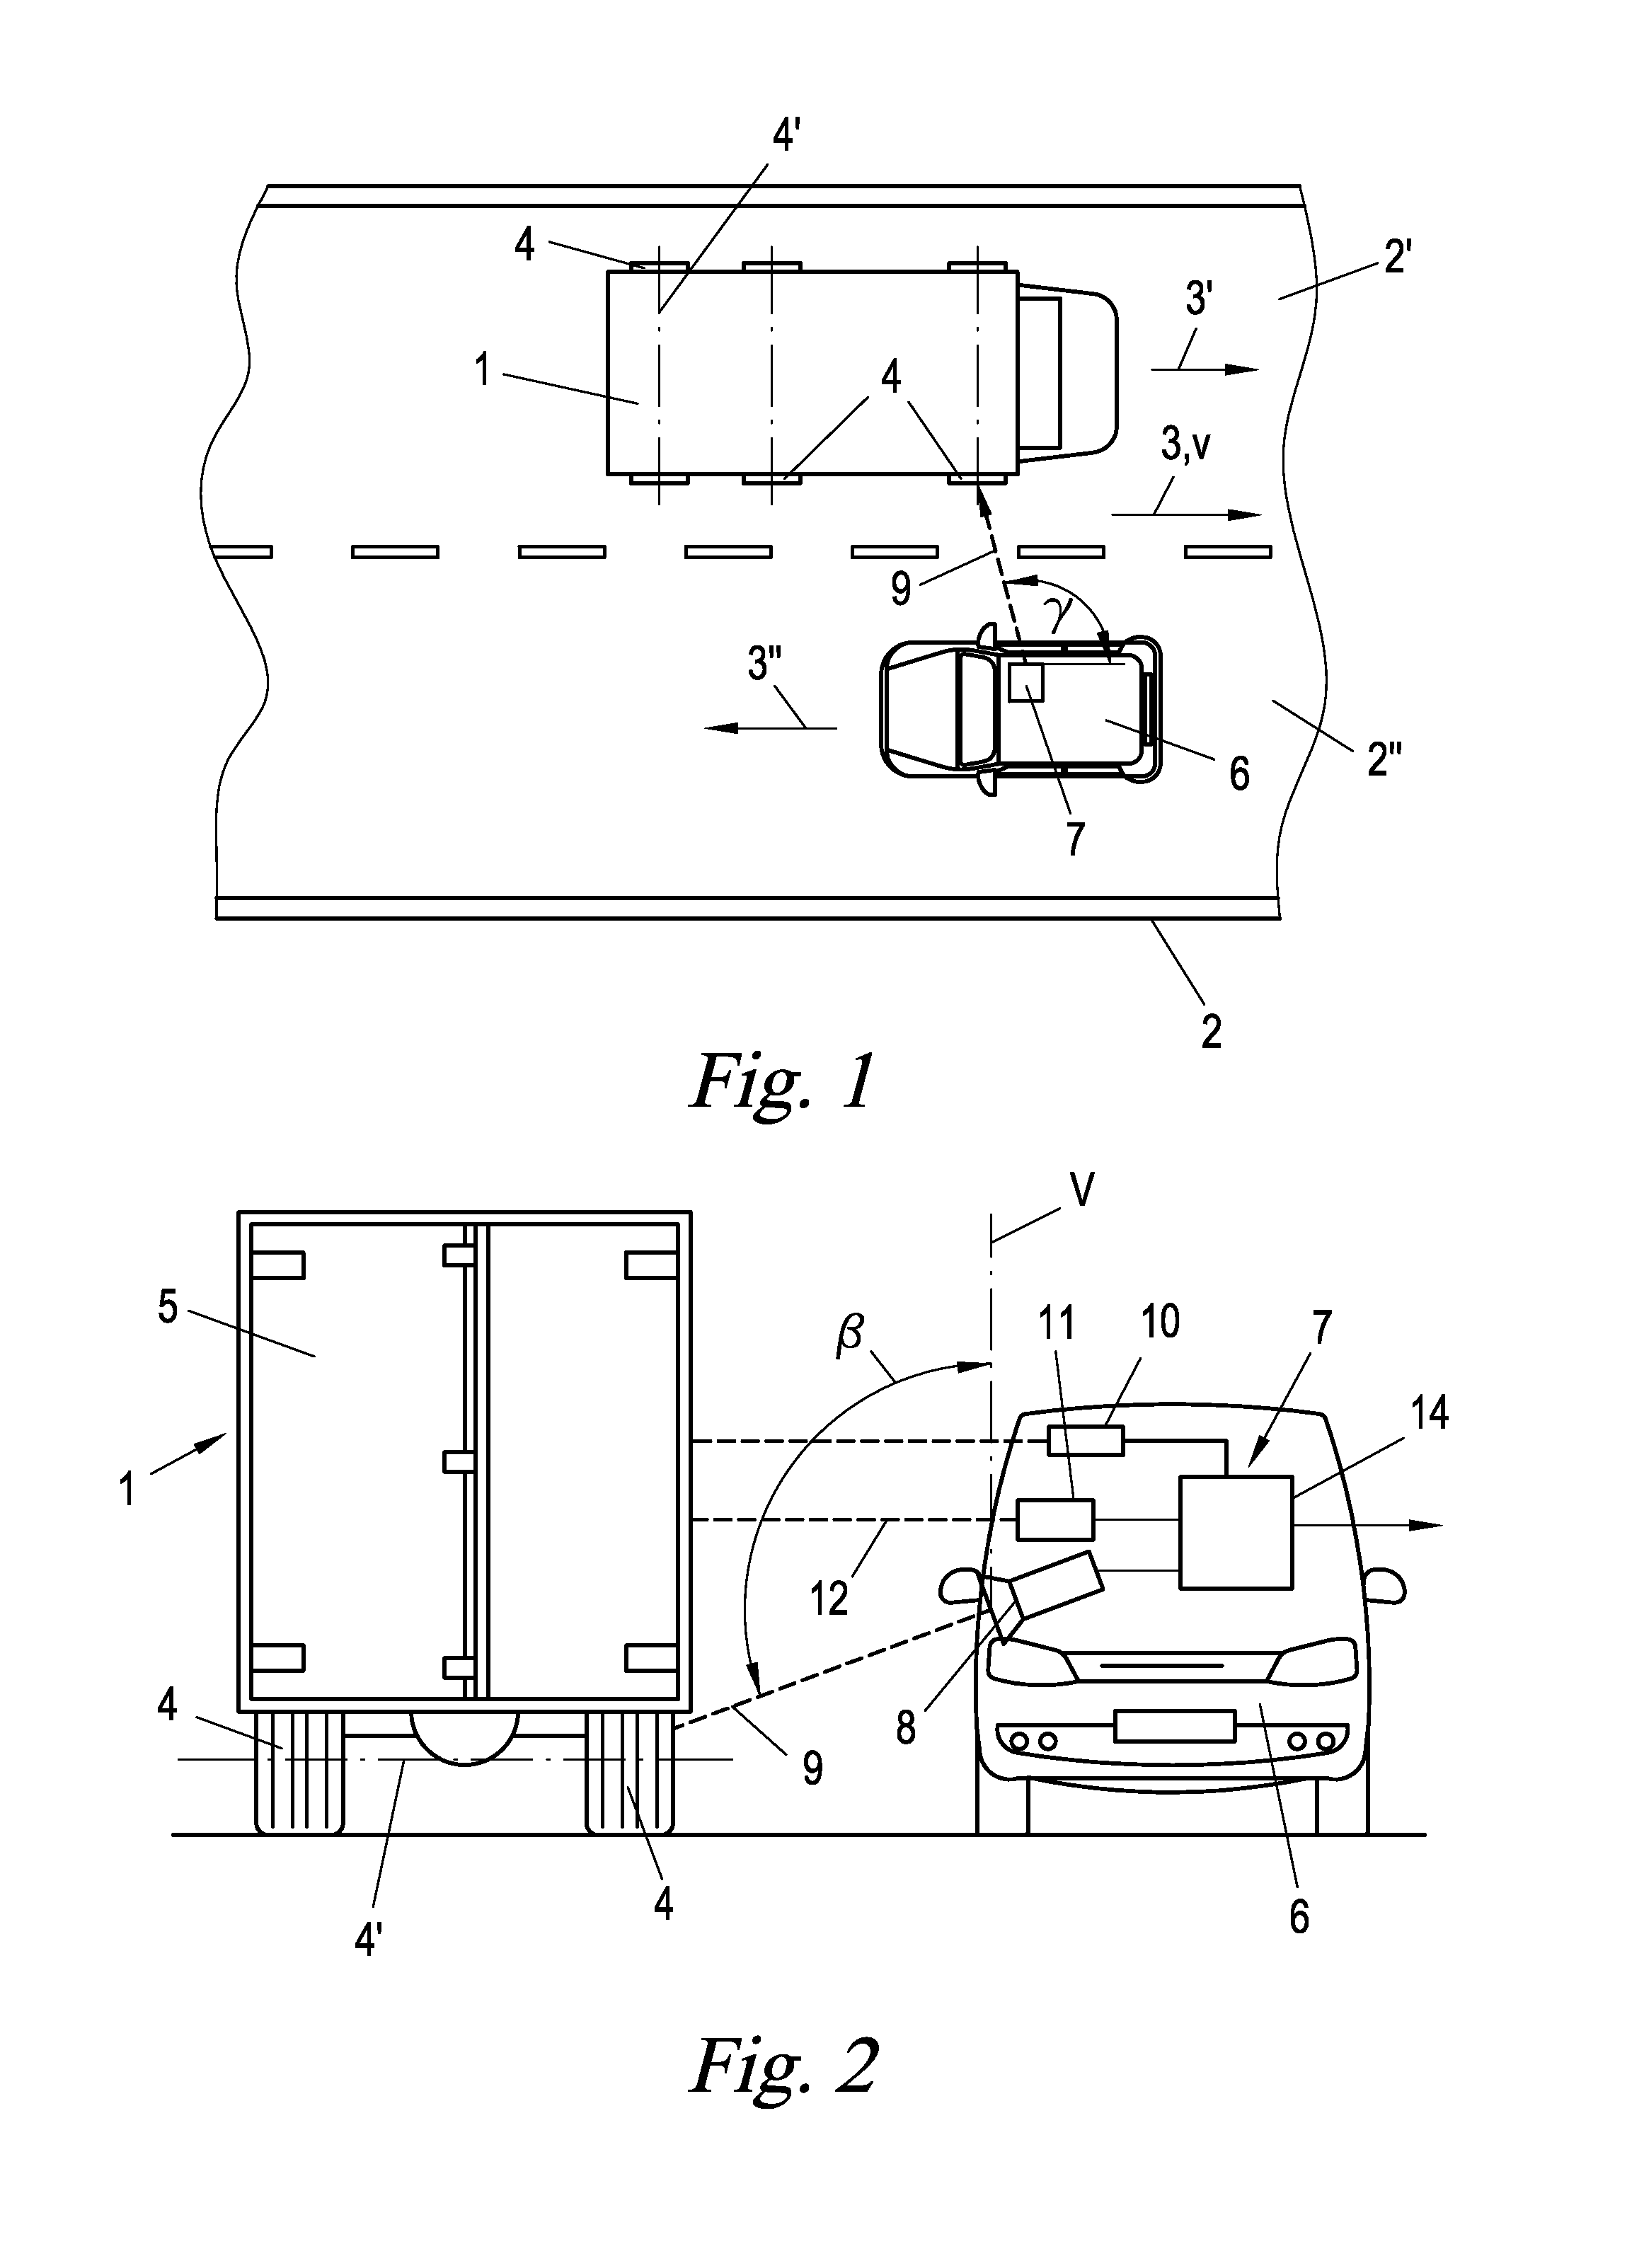 Method and Device for Detecting a Rotating Wheel